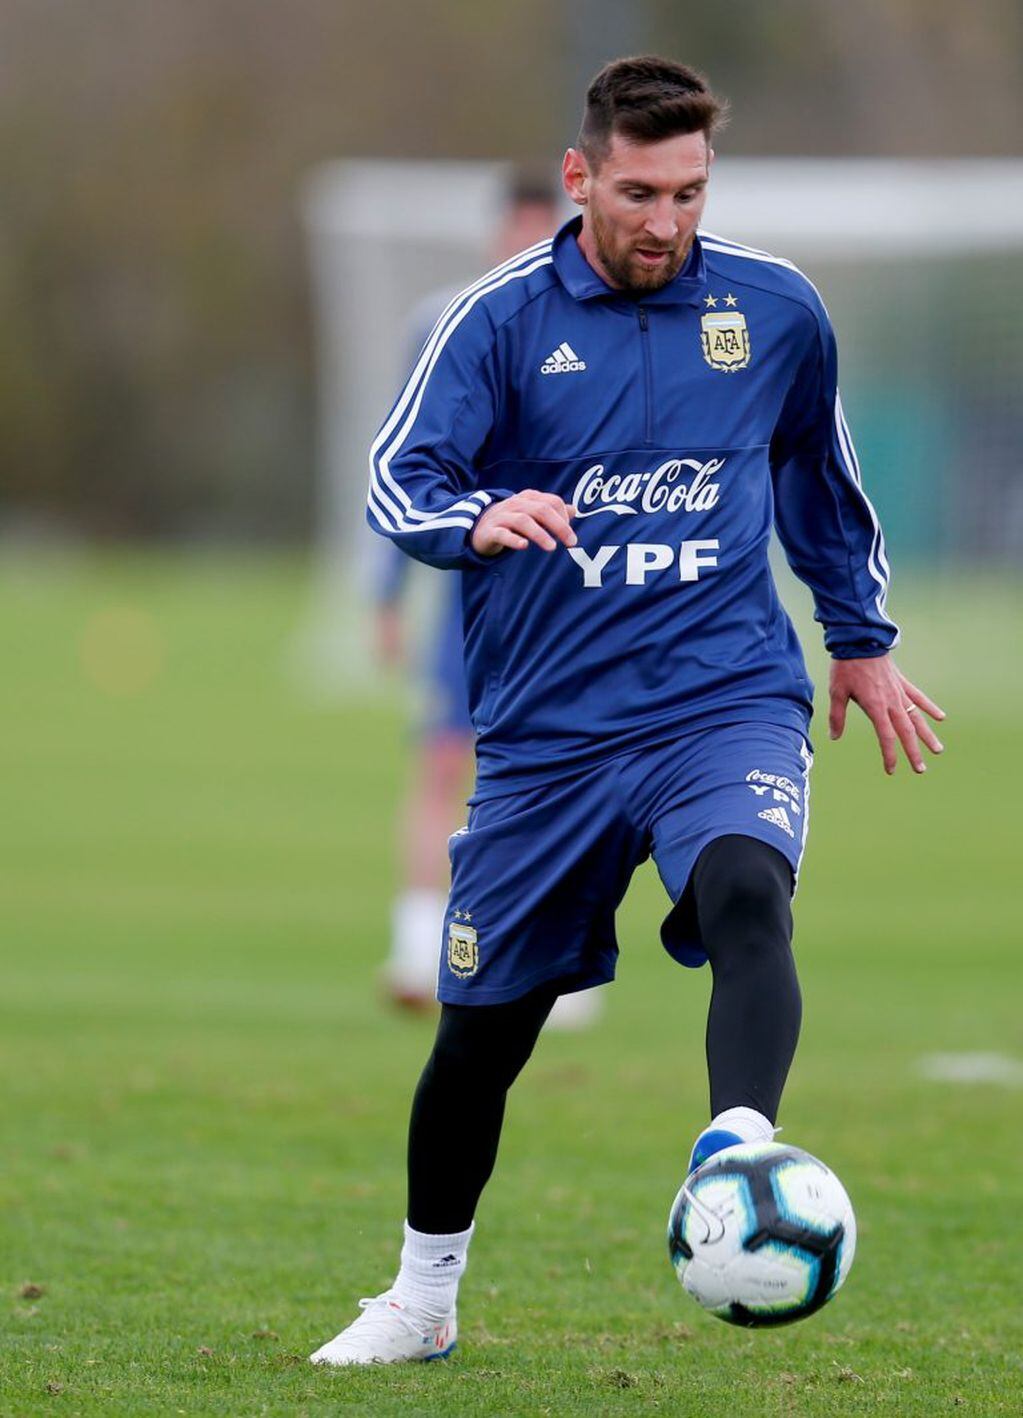 Argentina's player Lionel Messi dribbles the ball during a training session in Buenos Aires, Argentina, Thursday, May 30, 2019, ahead of the Copa America in neighboring Brazil. (AP Photo/Natacha Pisarenko)